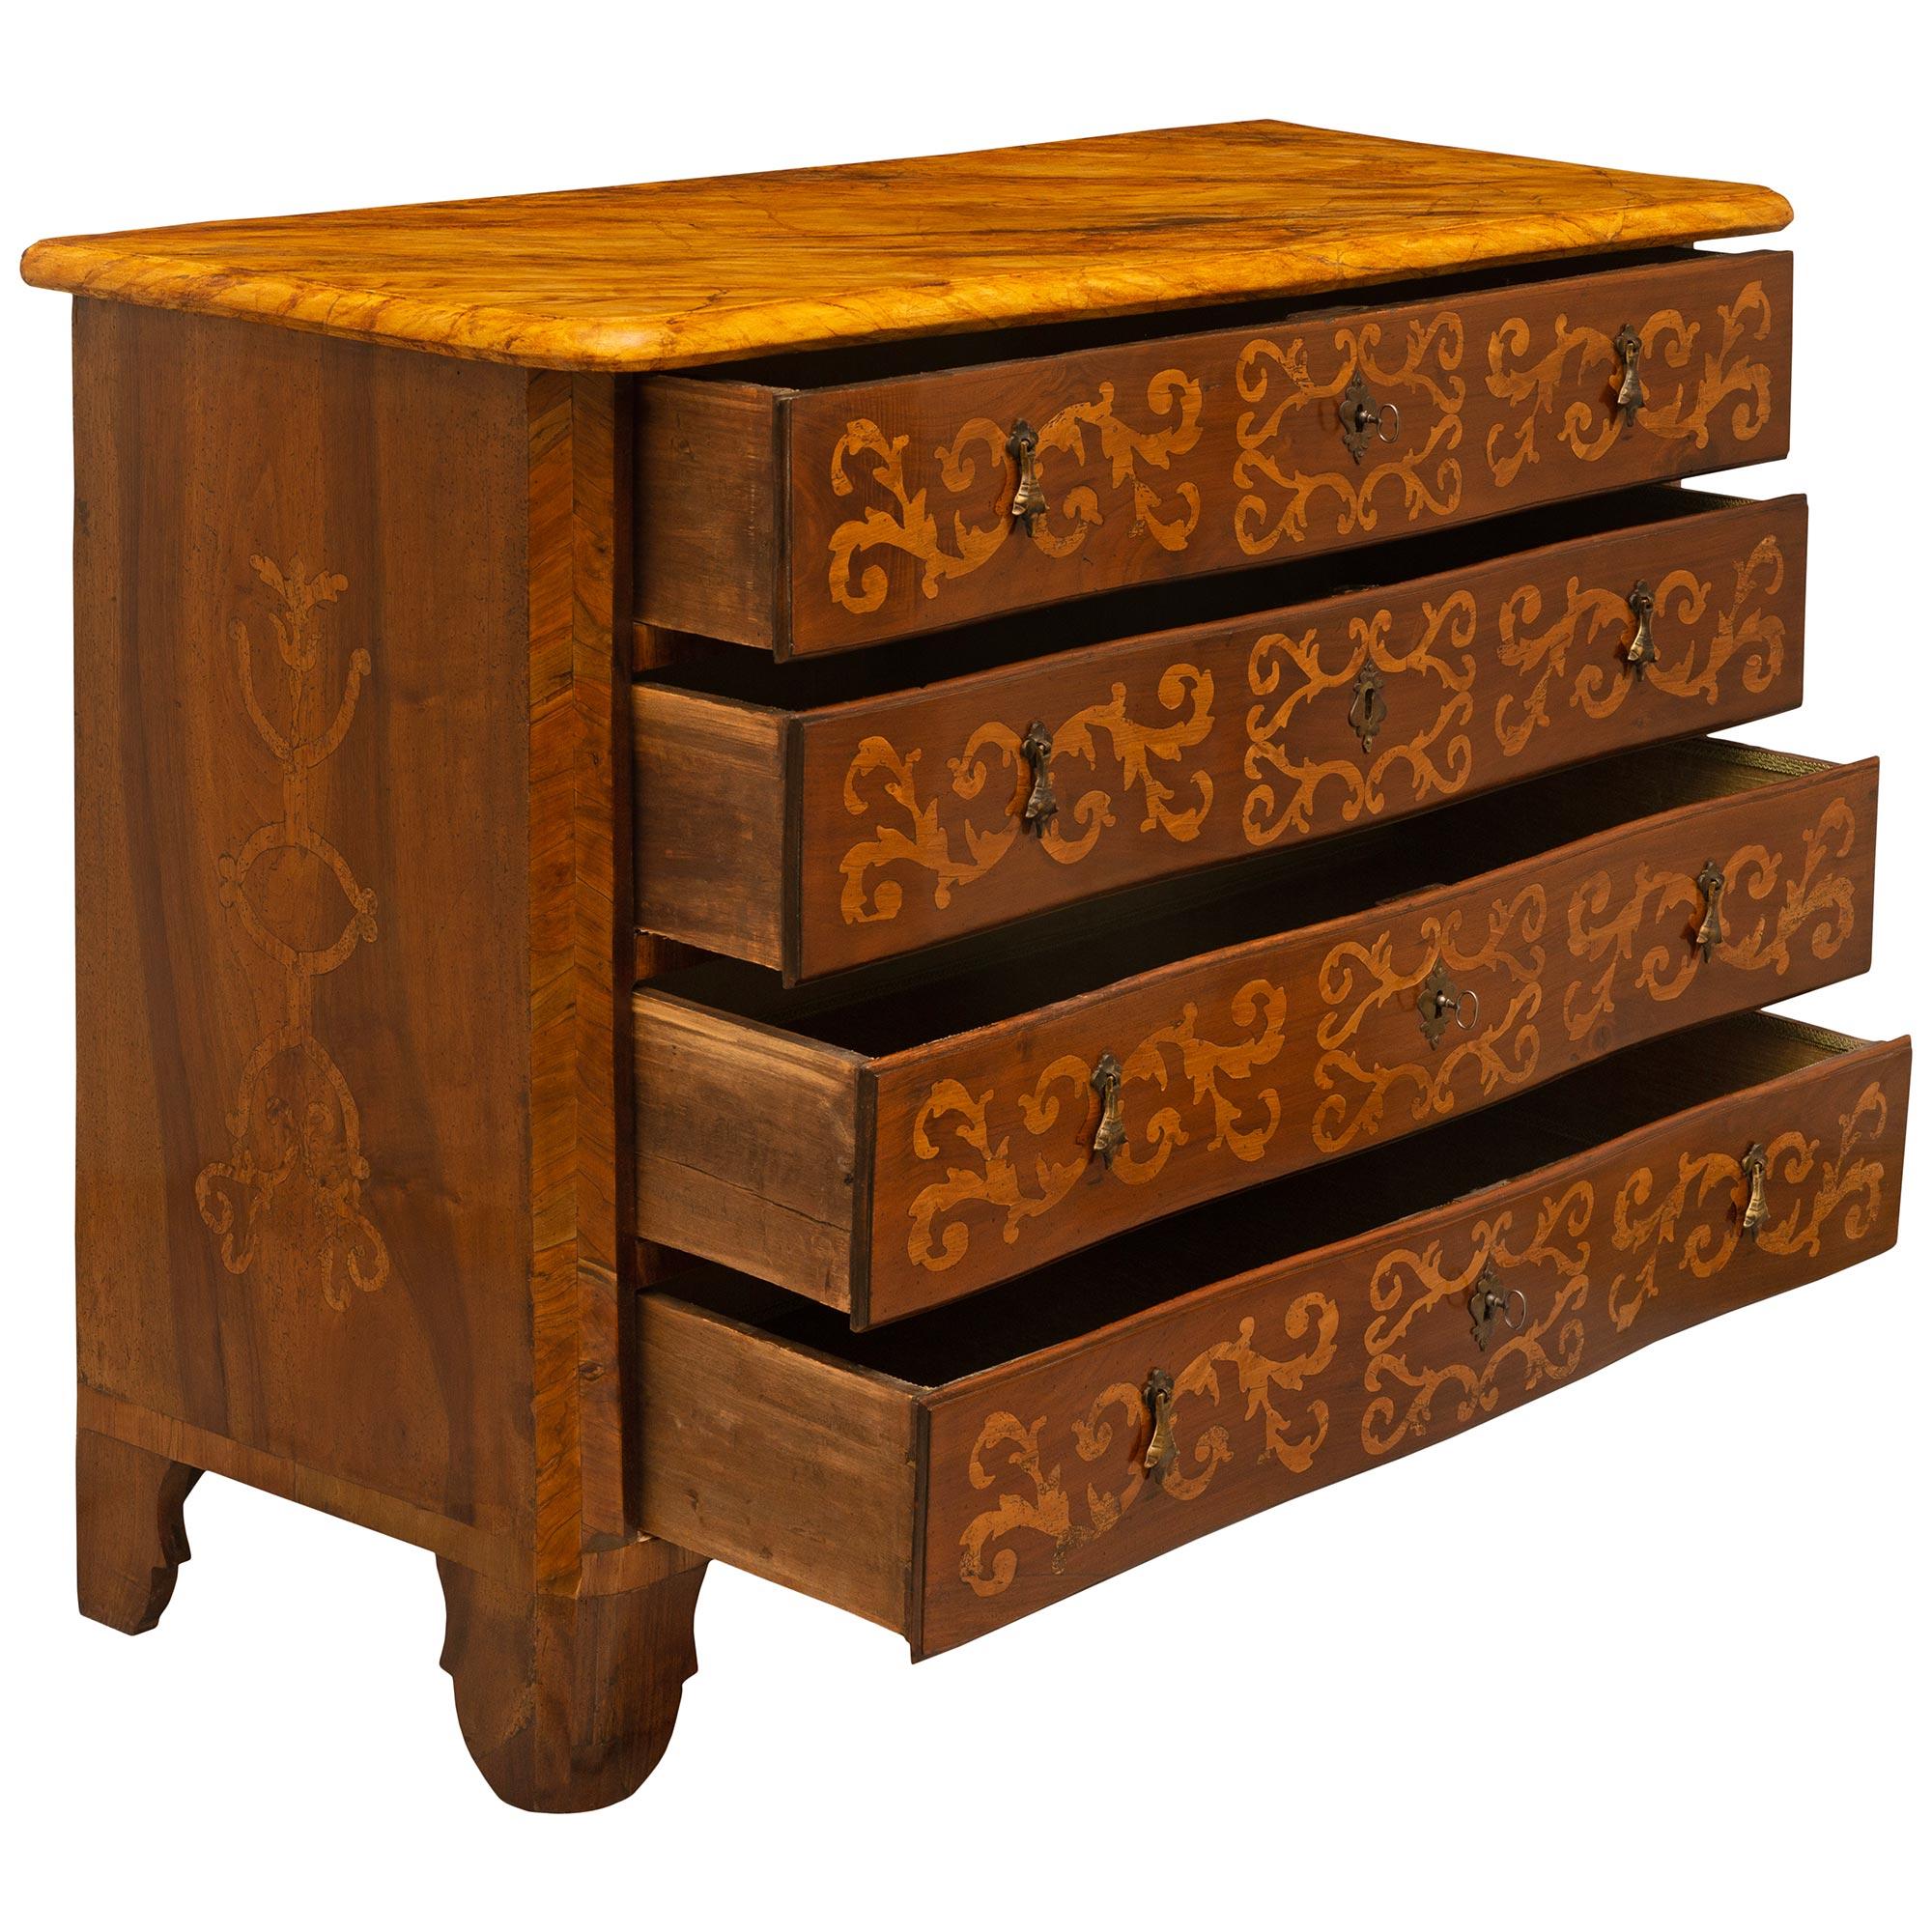 Italian Early 18th Century Louis XIV Period Four-Drawer Walnut Chest In Good Condition For Sale In West Palm Beach, FL